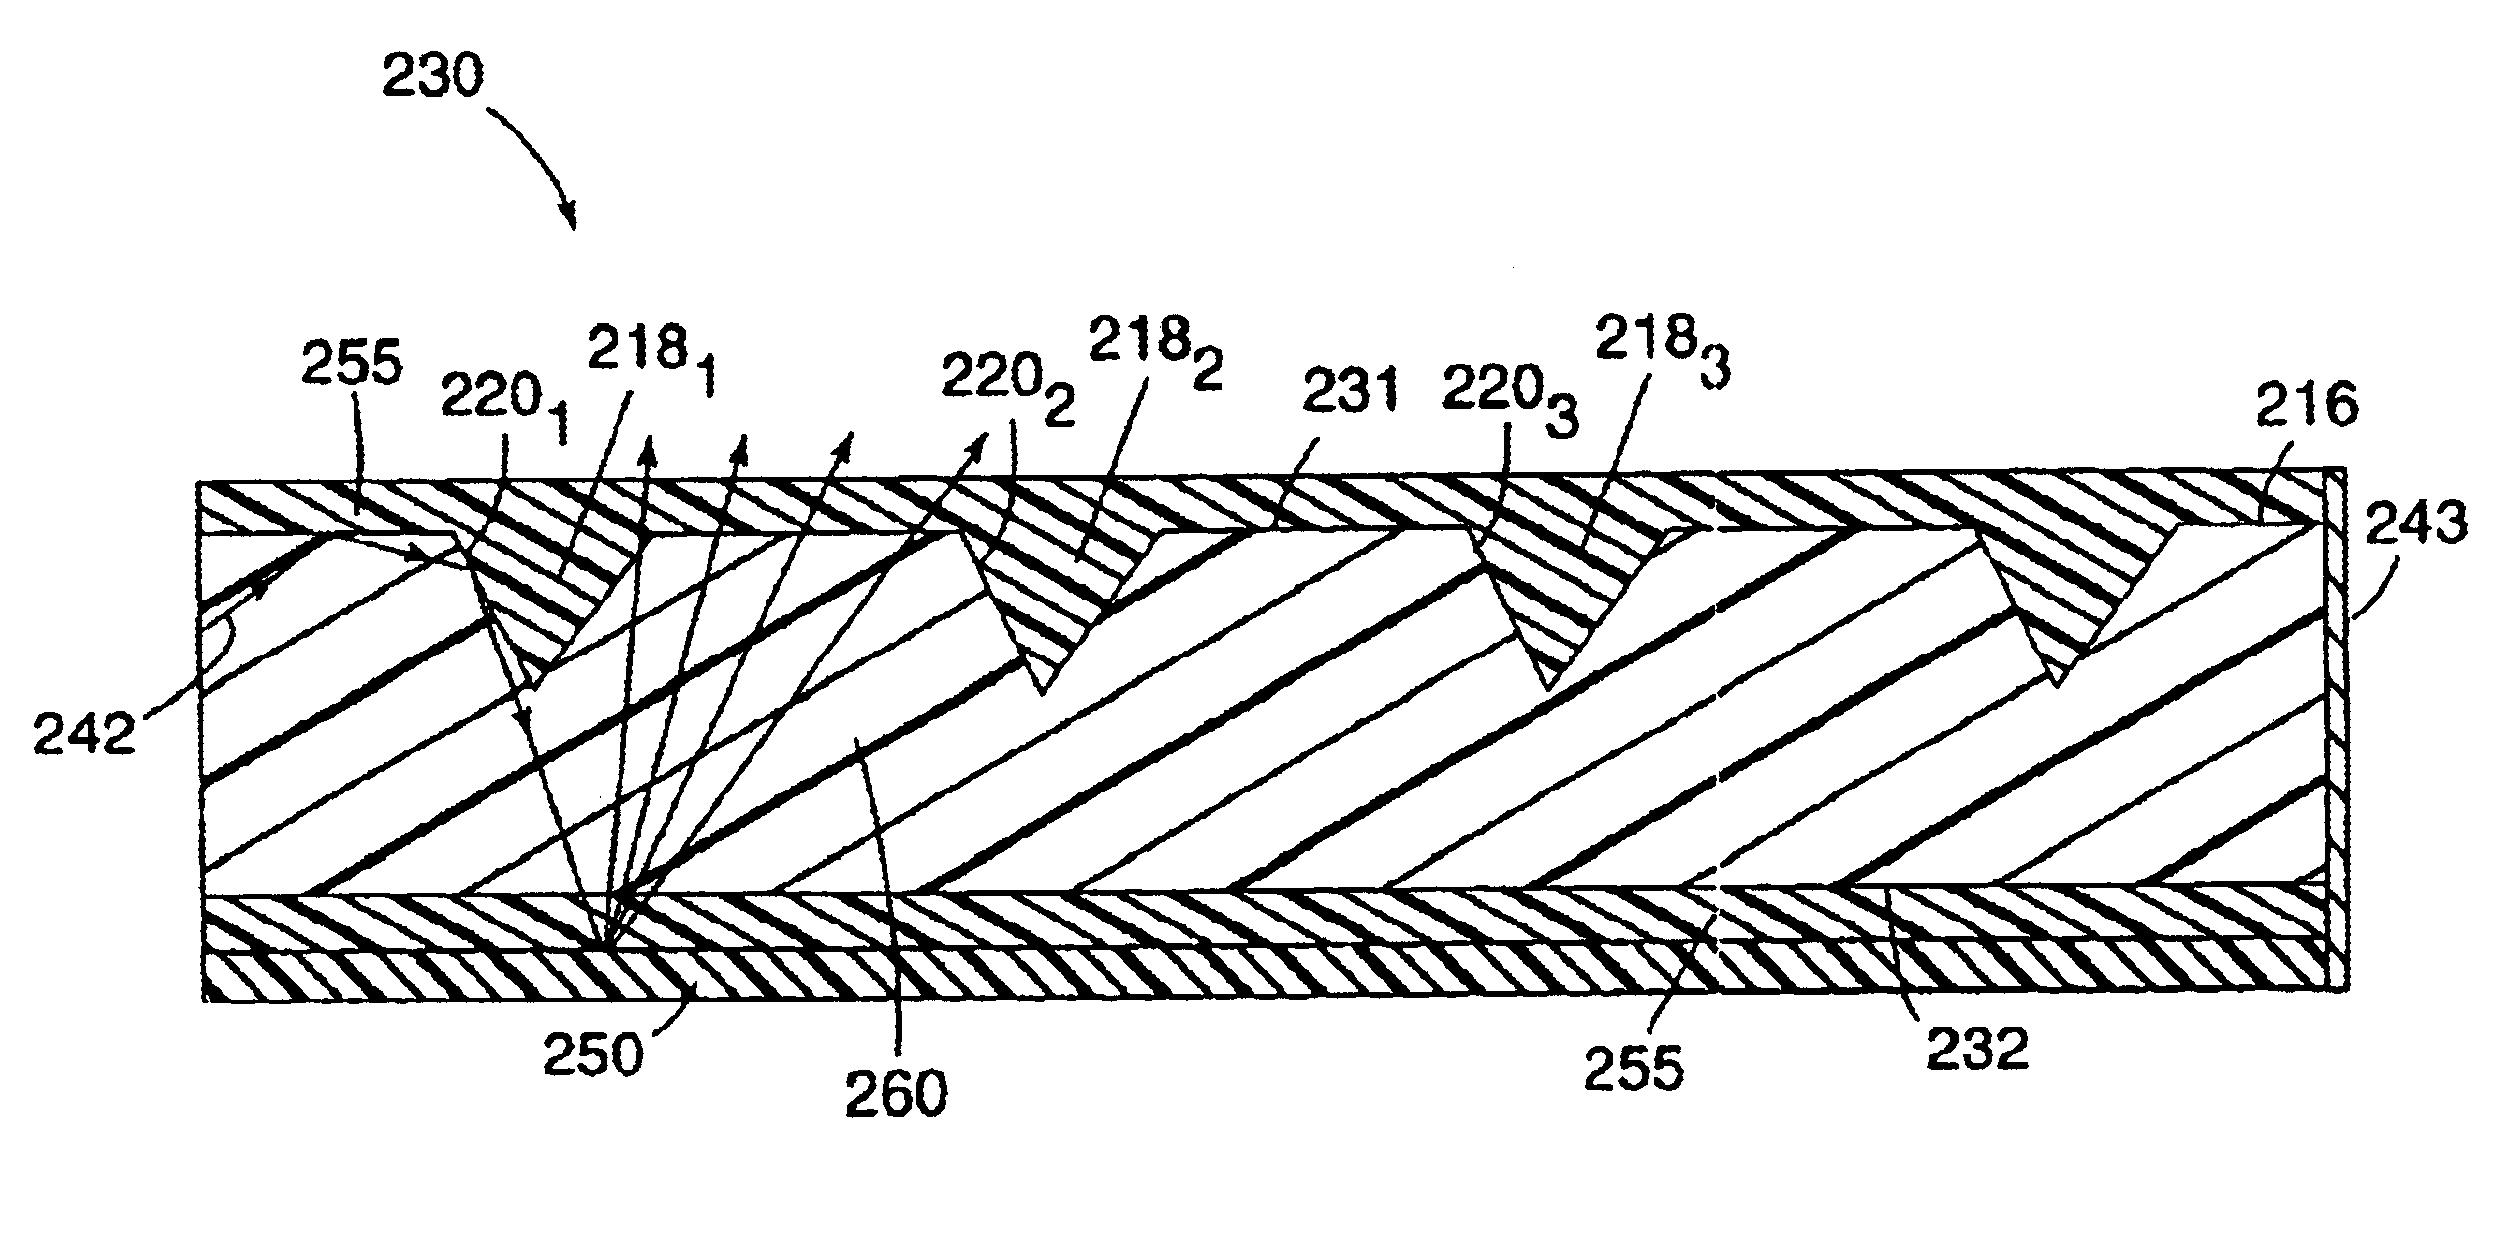 Light guide illumination device appearing uniform in brightness along its length